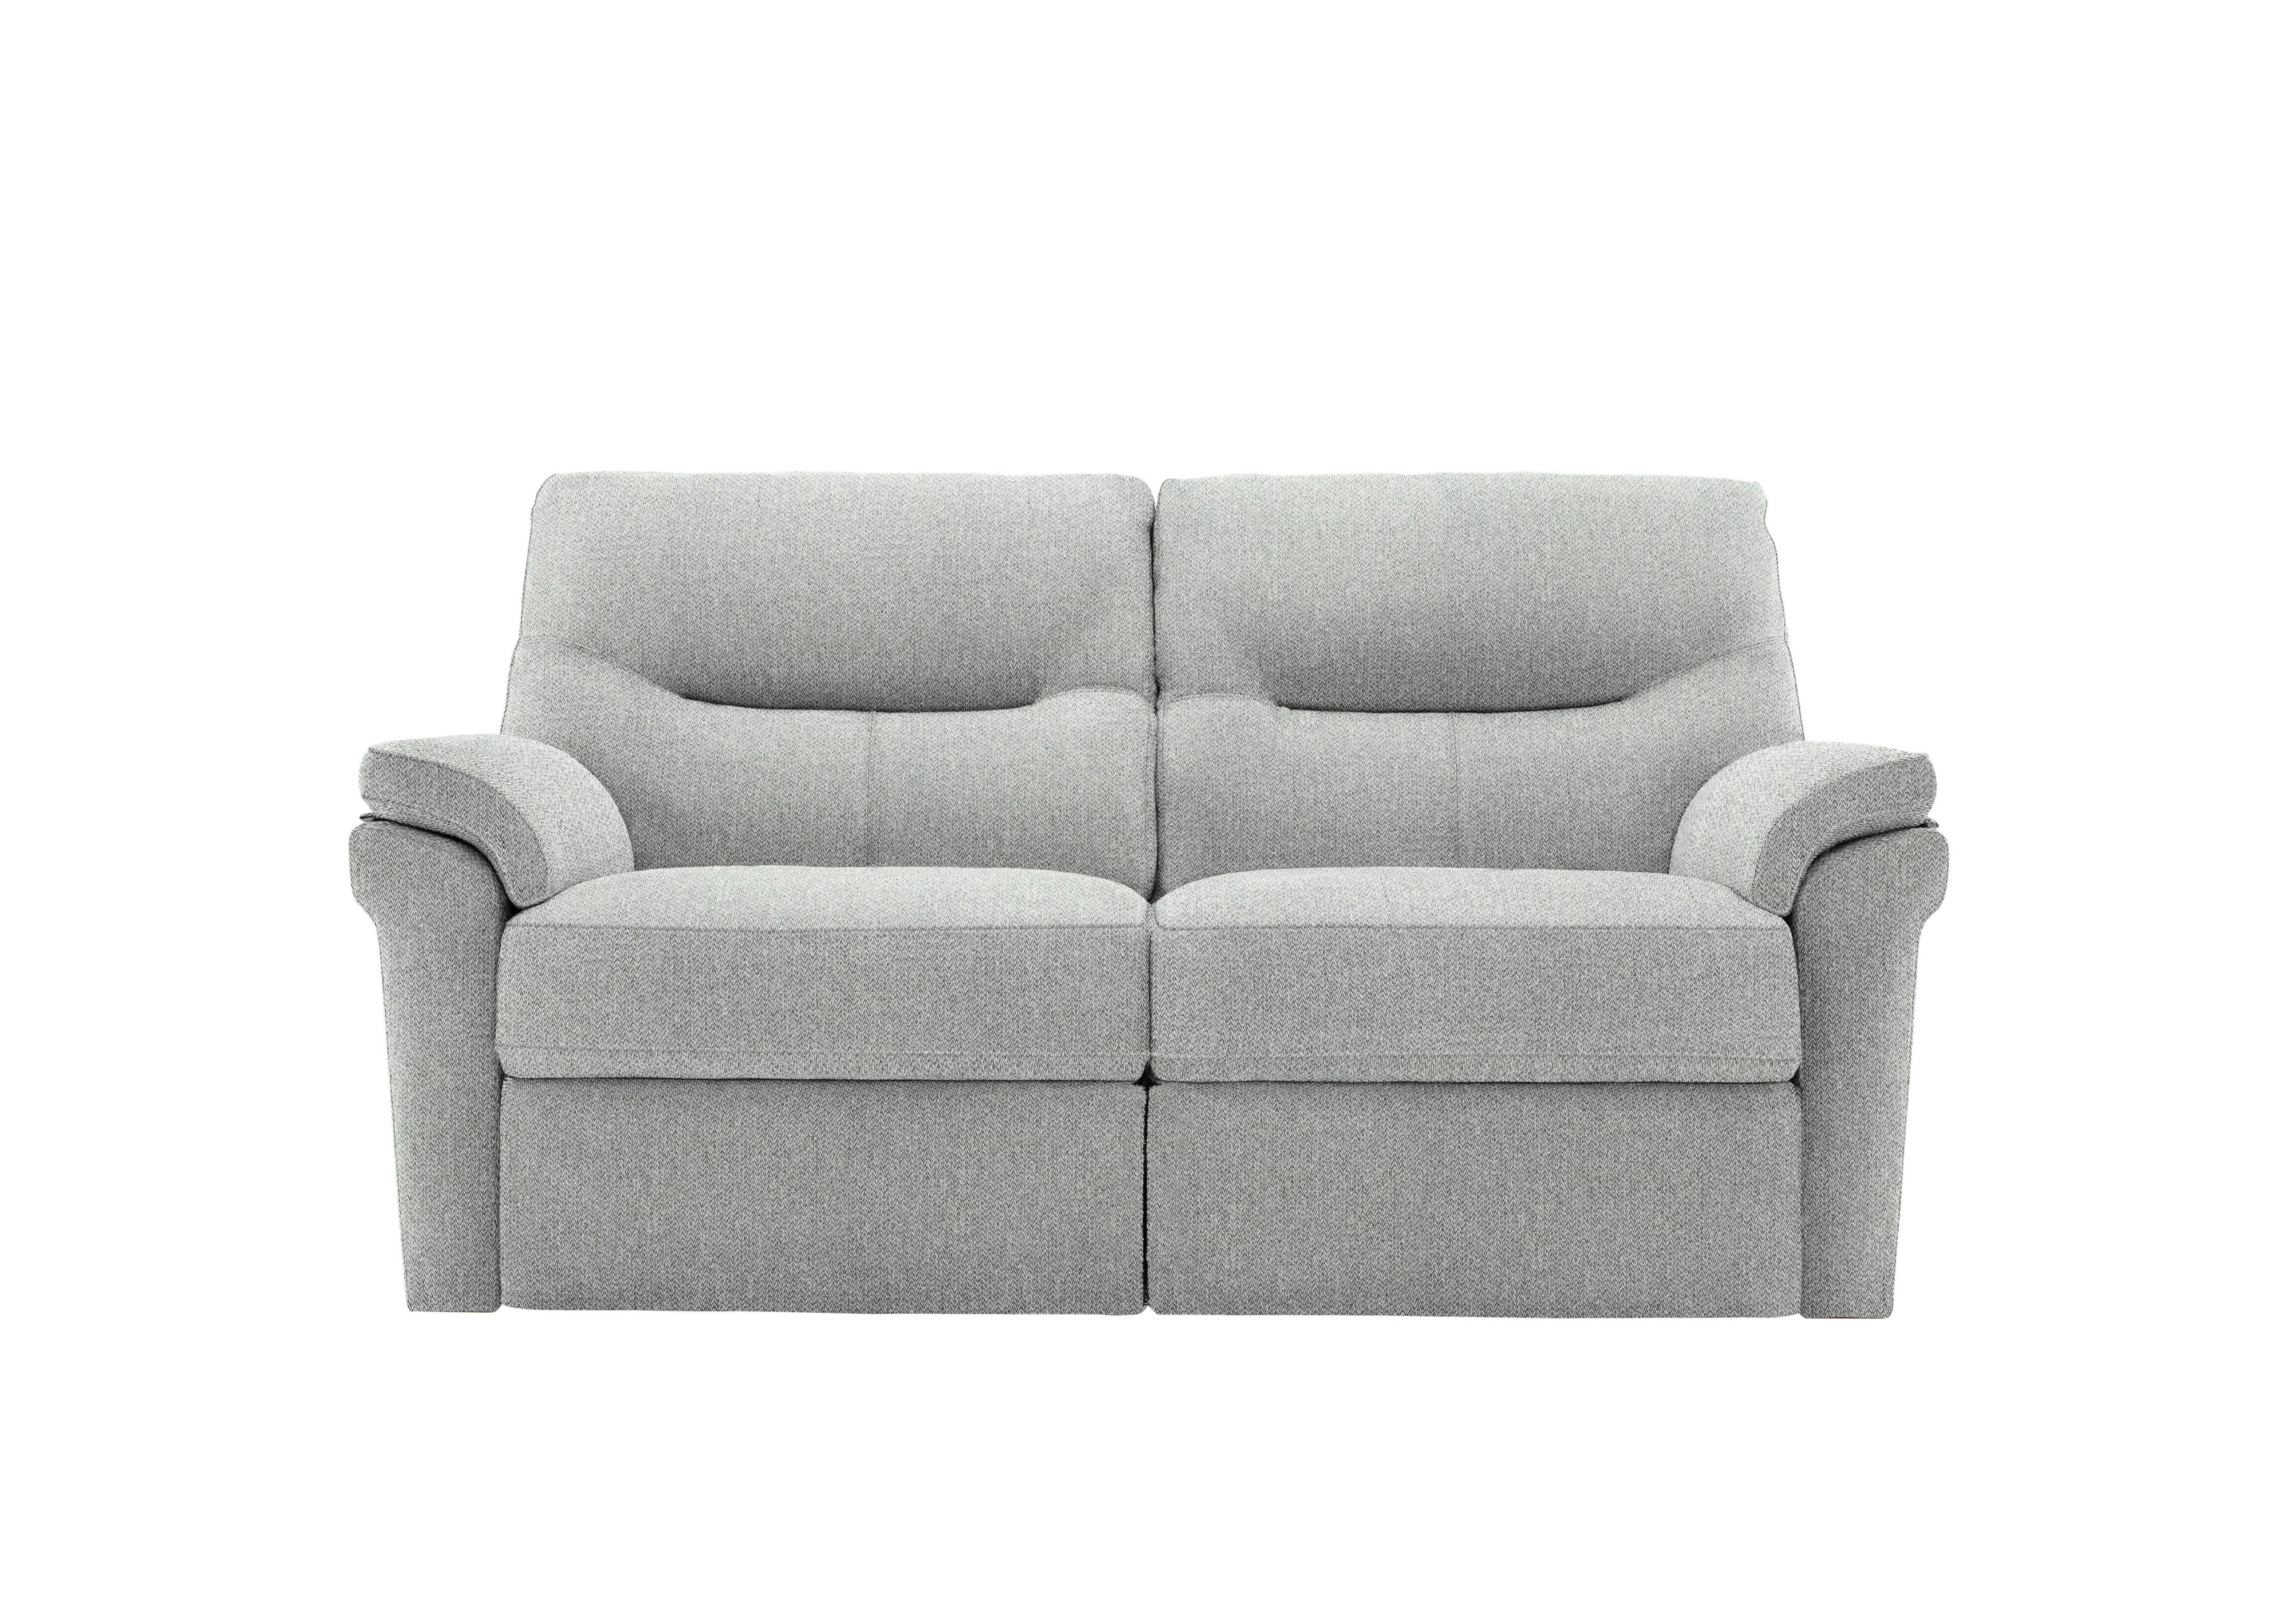 Seattle 2 Seater Fabric Sofa in A011 Swift Cygnet on Furniture Village